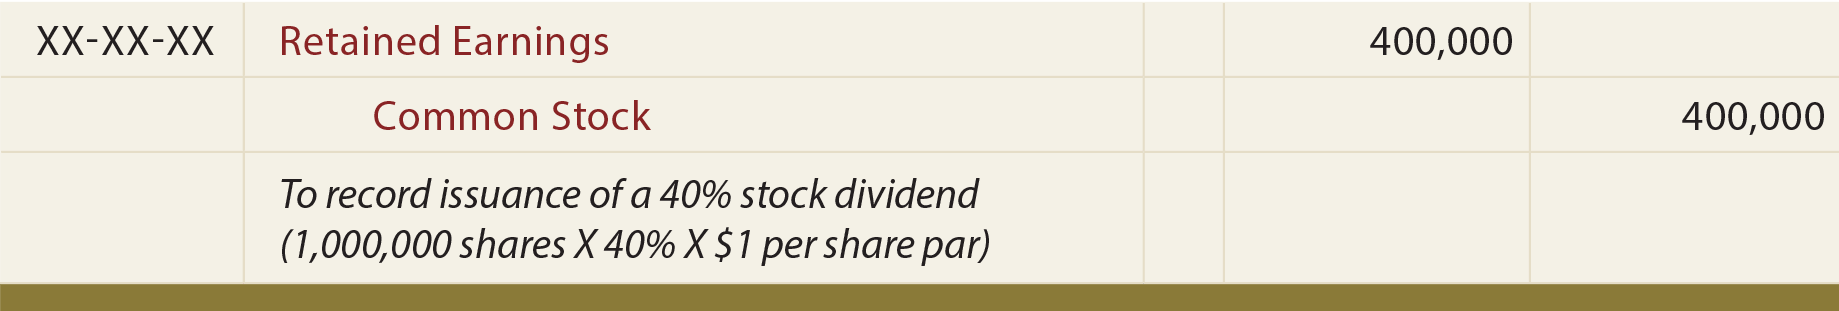 Large Stock Dividend Journal Entry